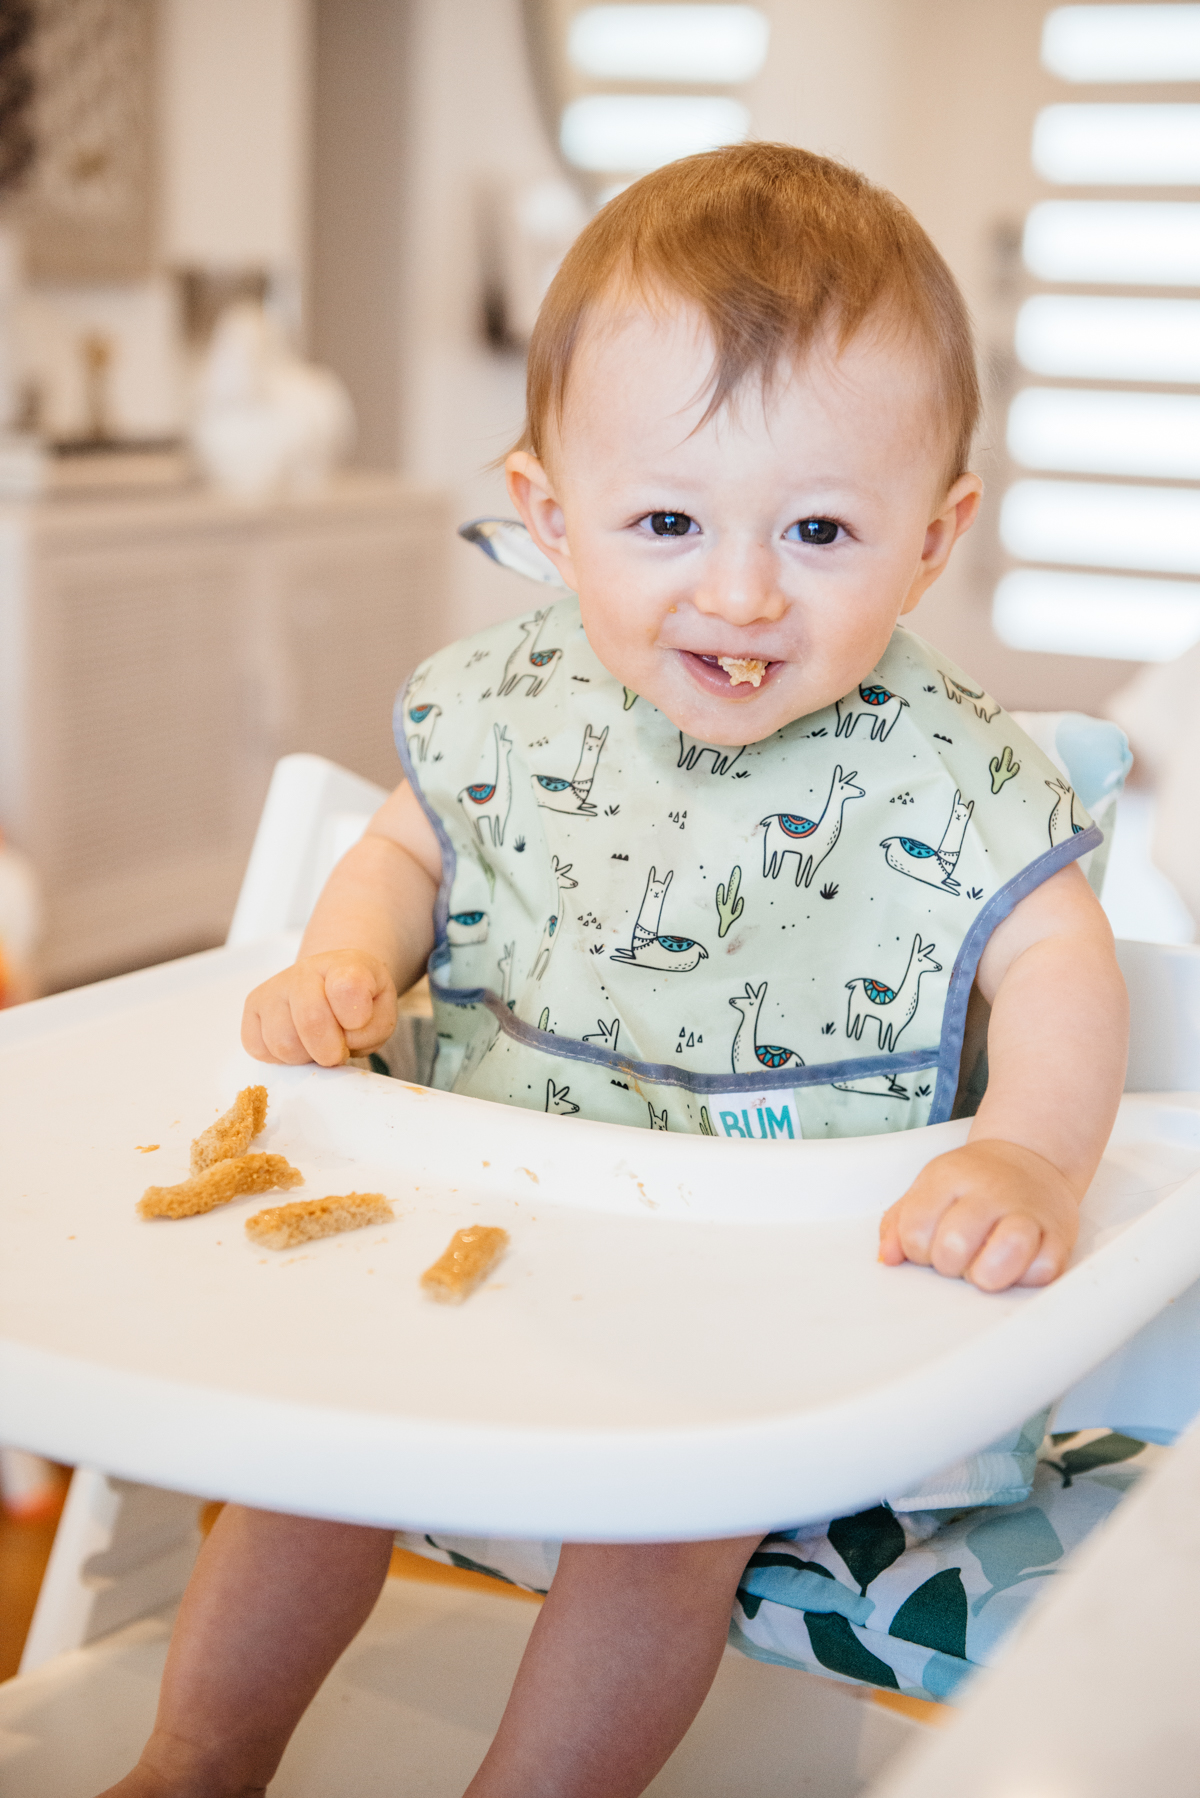 BABY FEEDING TIPS: BABY CEREAL, PUREE, AND BABY LED WEANING stokke high chair kimberly lapides eatsleepwear